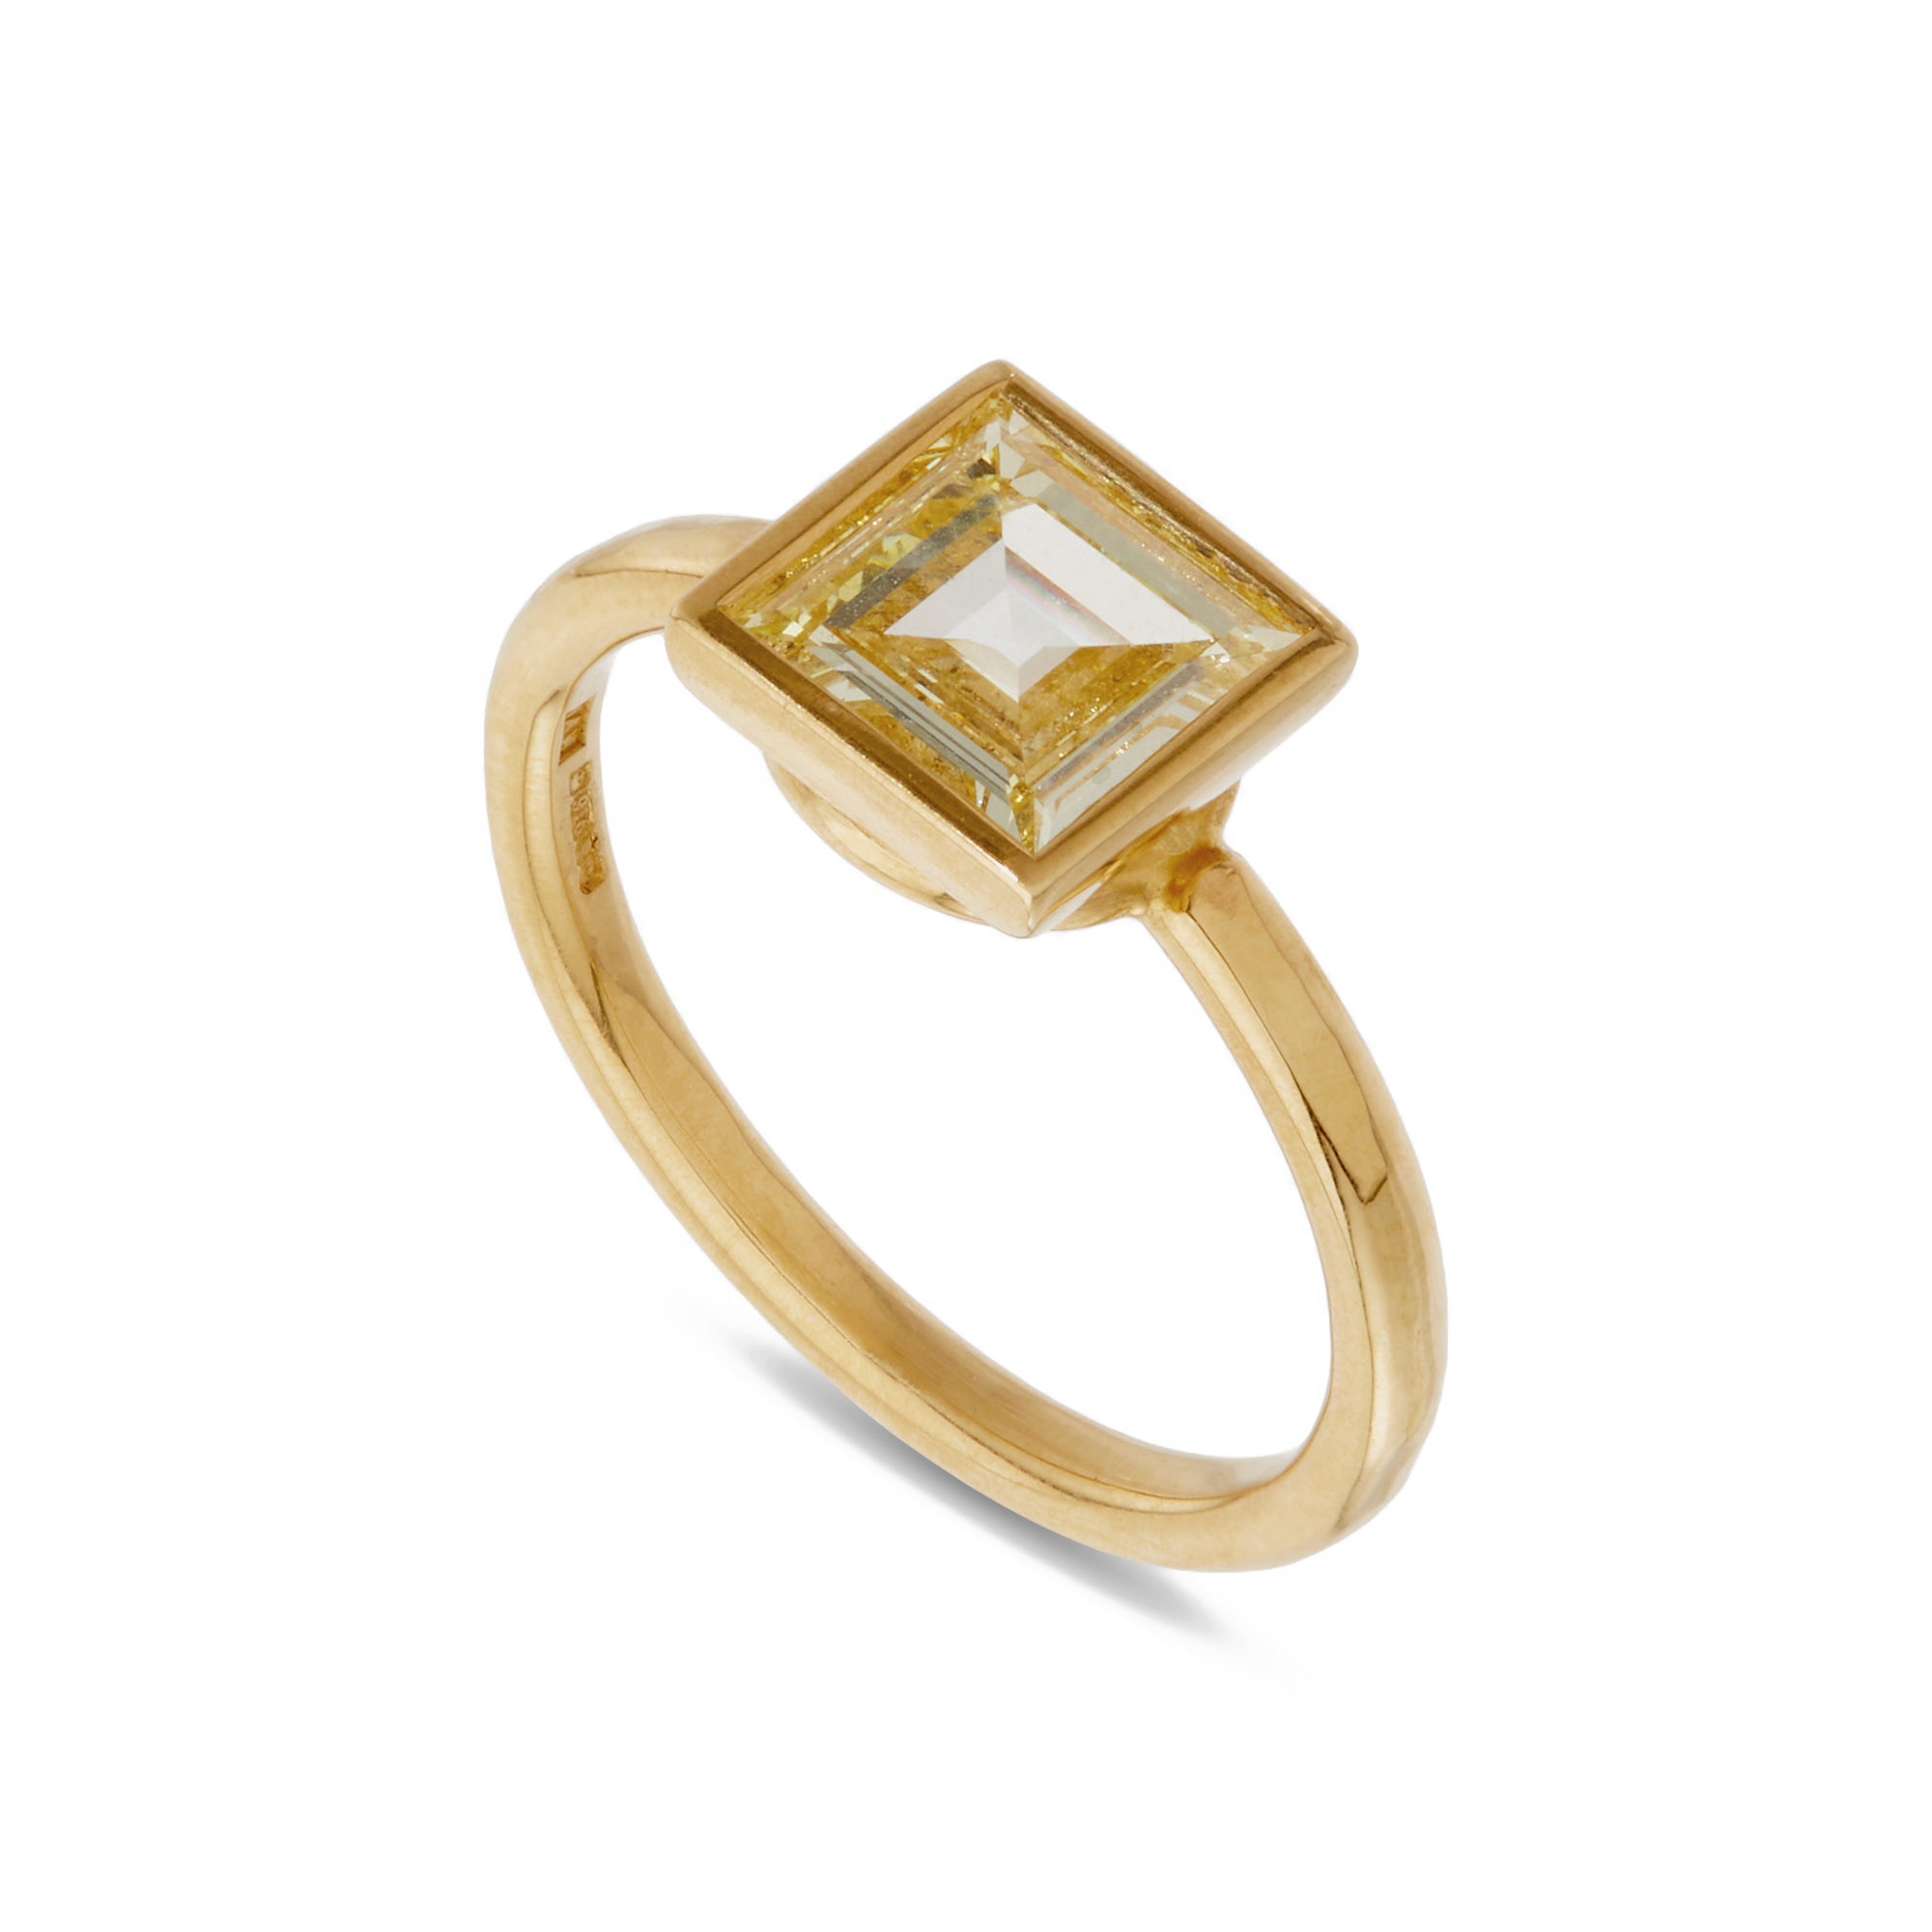 William Welstead - Natural Fancy Yellow Dia Ring view 2